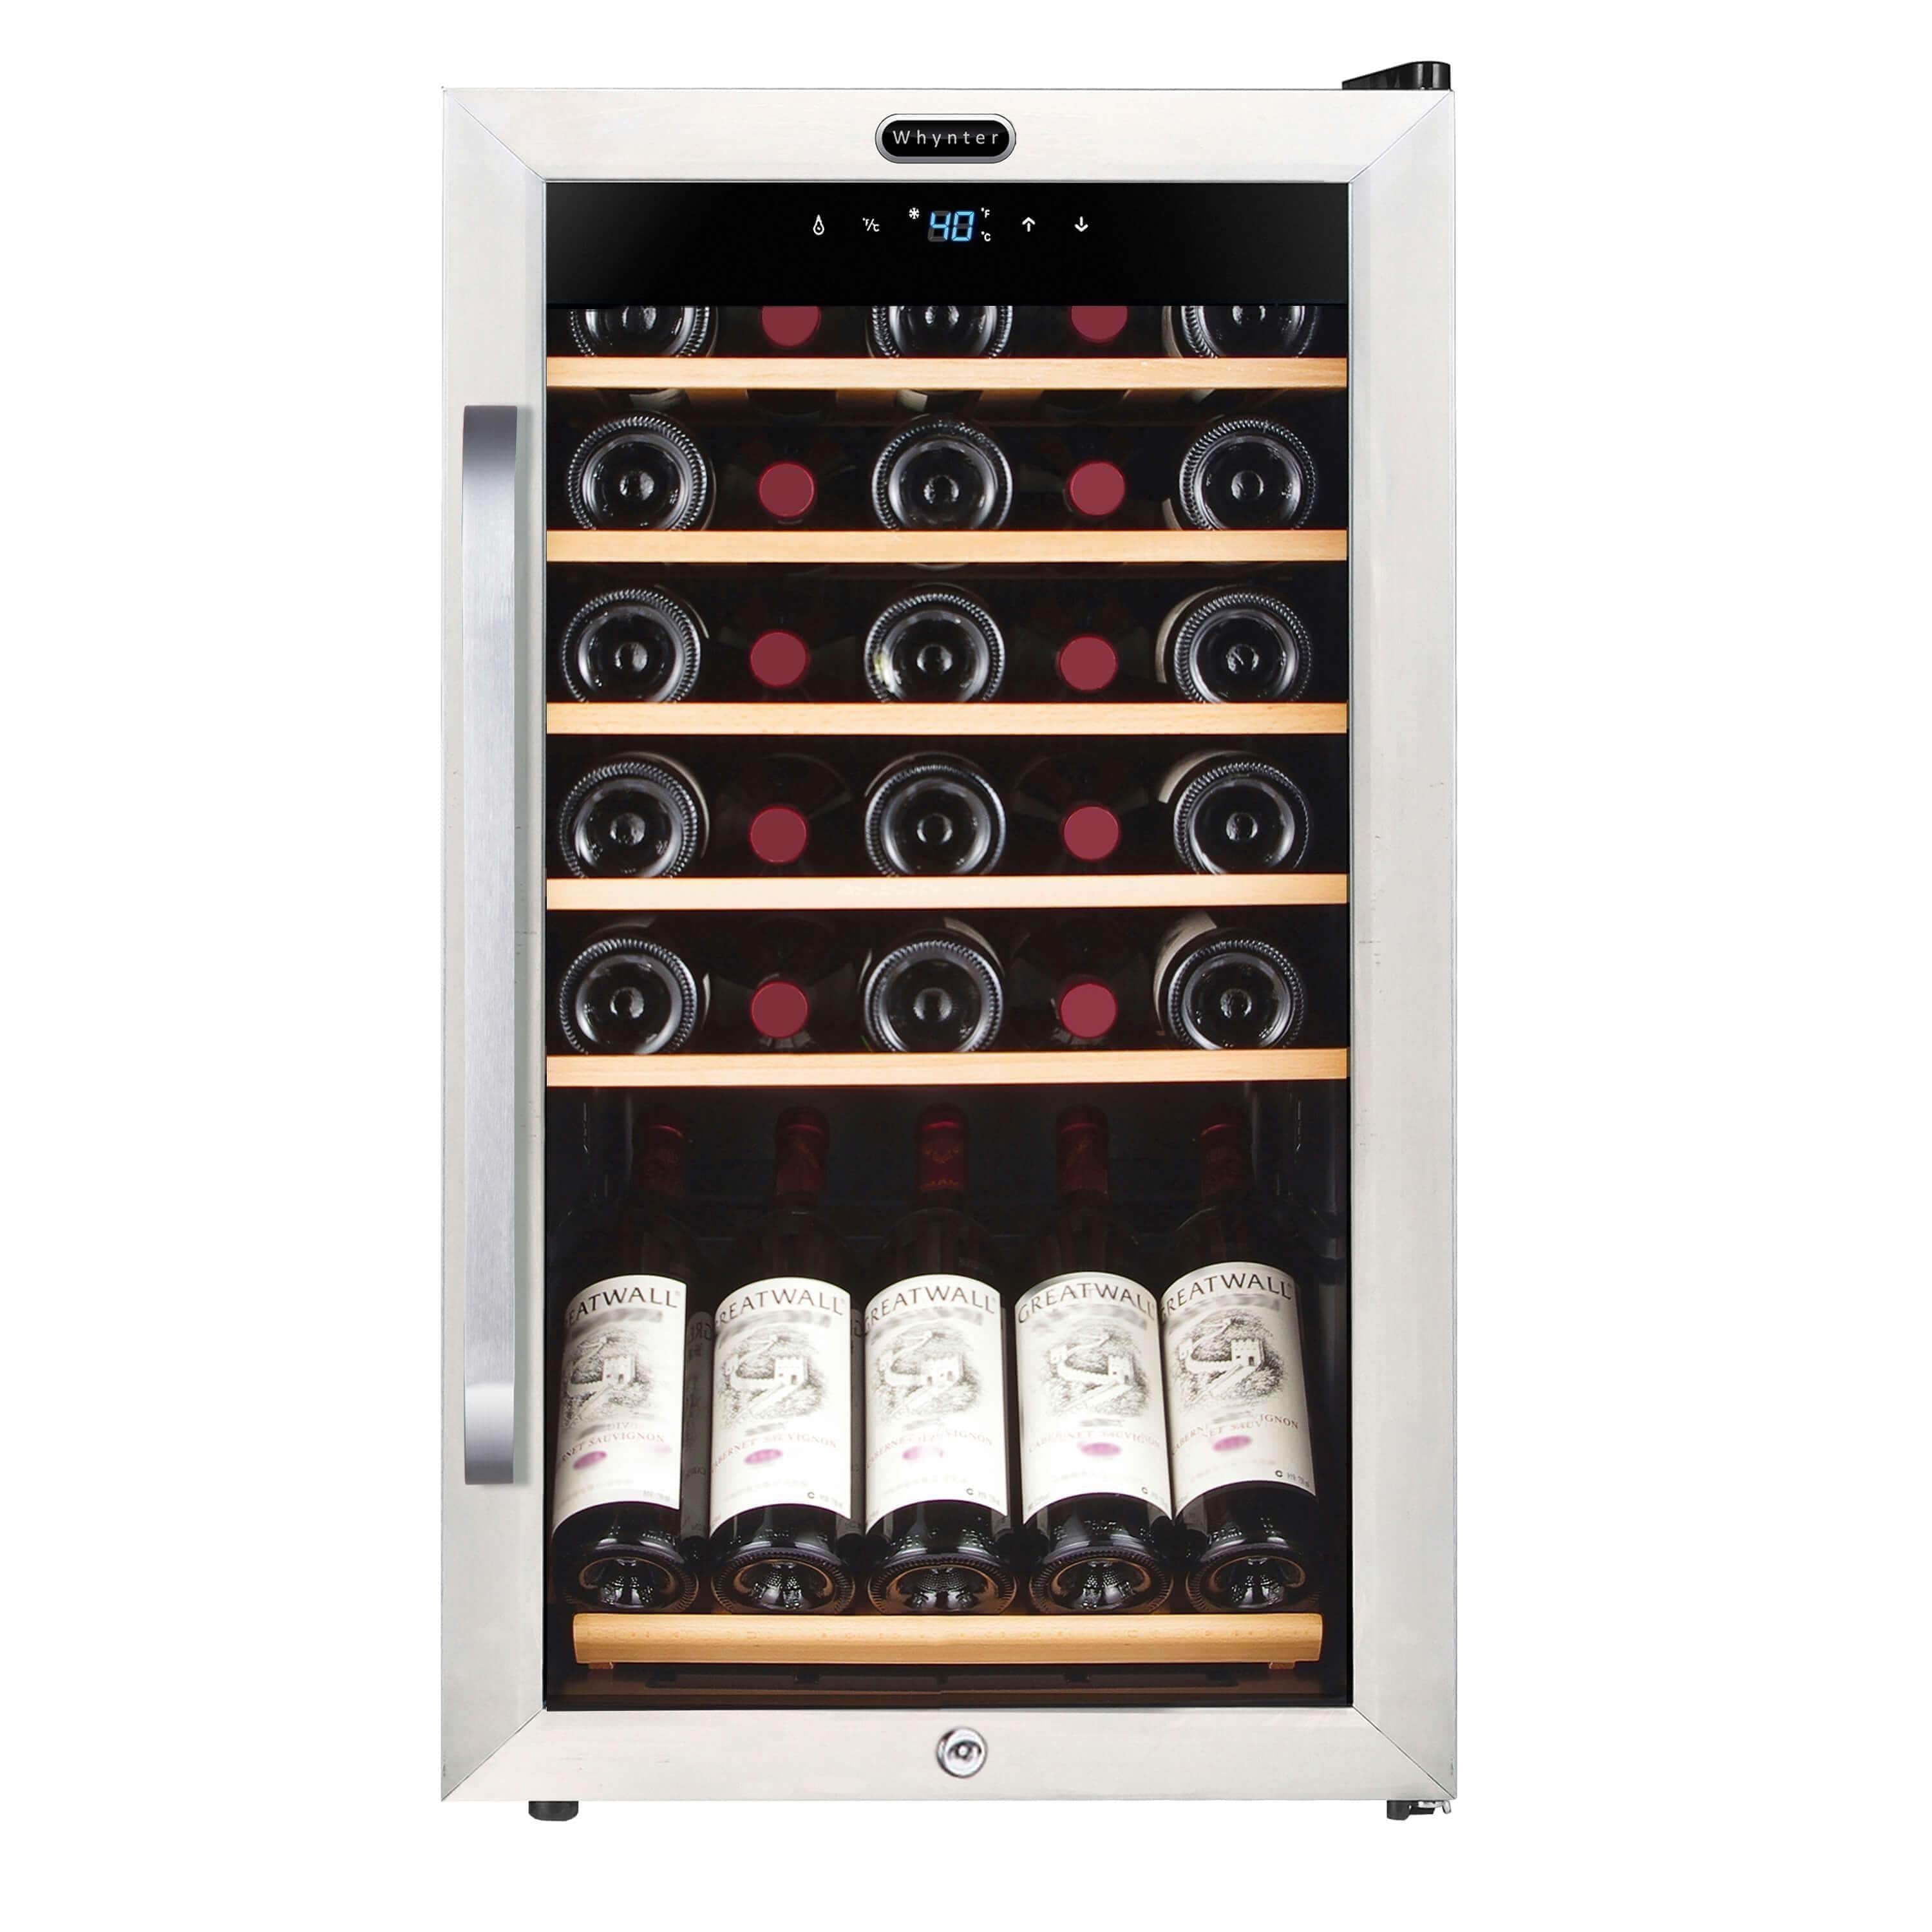 Whynter 34 Bottle Freestanding Stainless Steel Refrigerator with Display Shelf and Digital Control FWC-341TS Wine Coolers FWC-341TS Luxury Appliances Direct